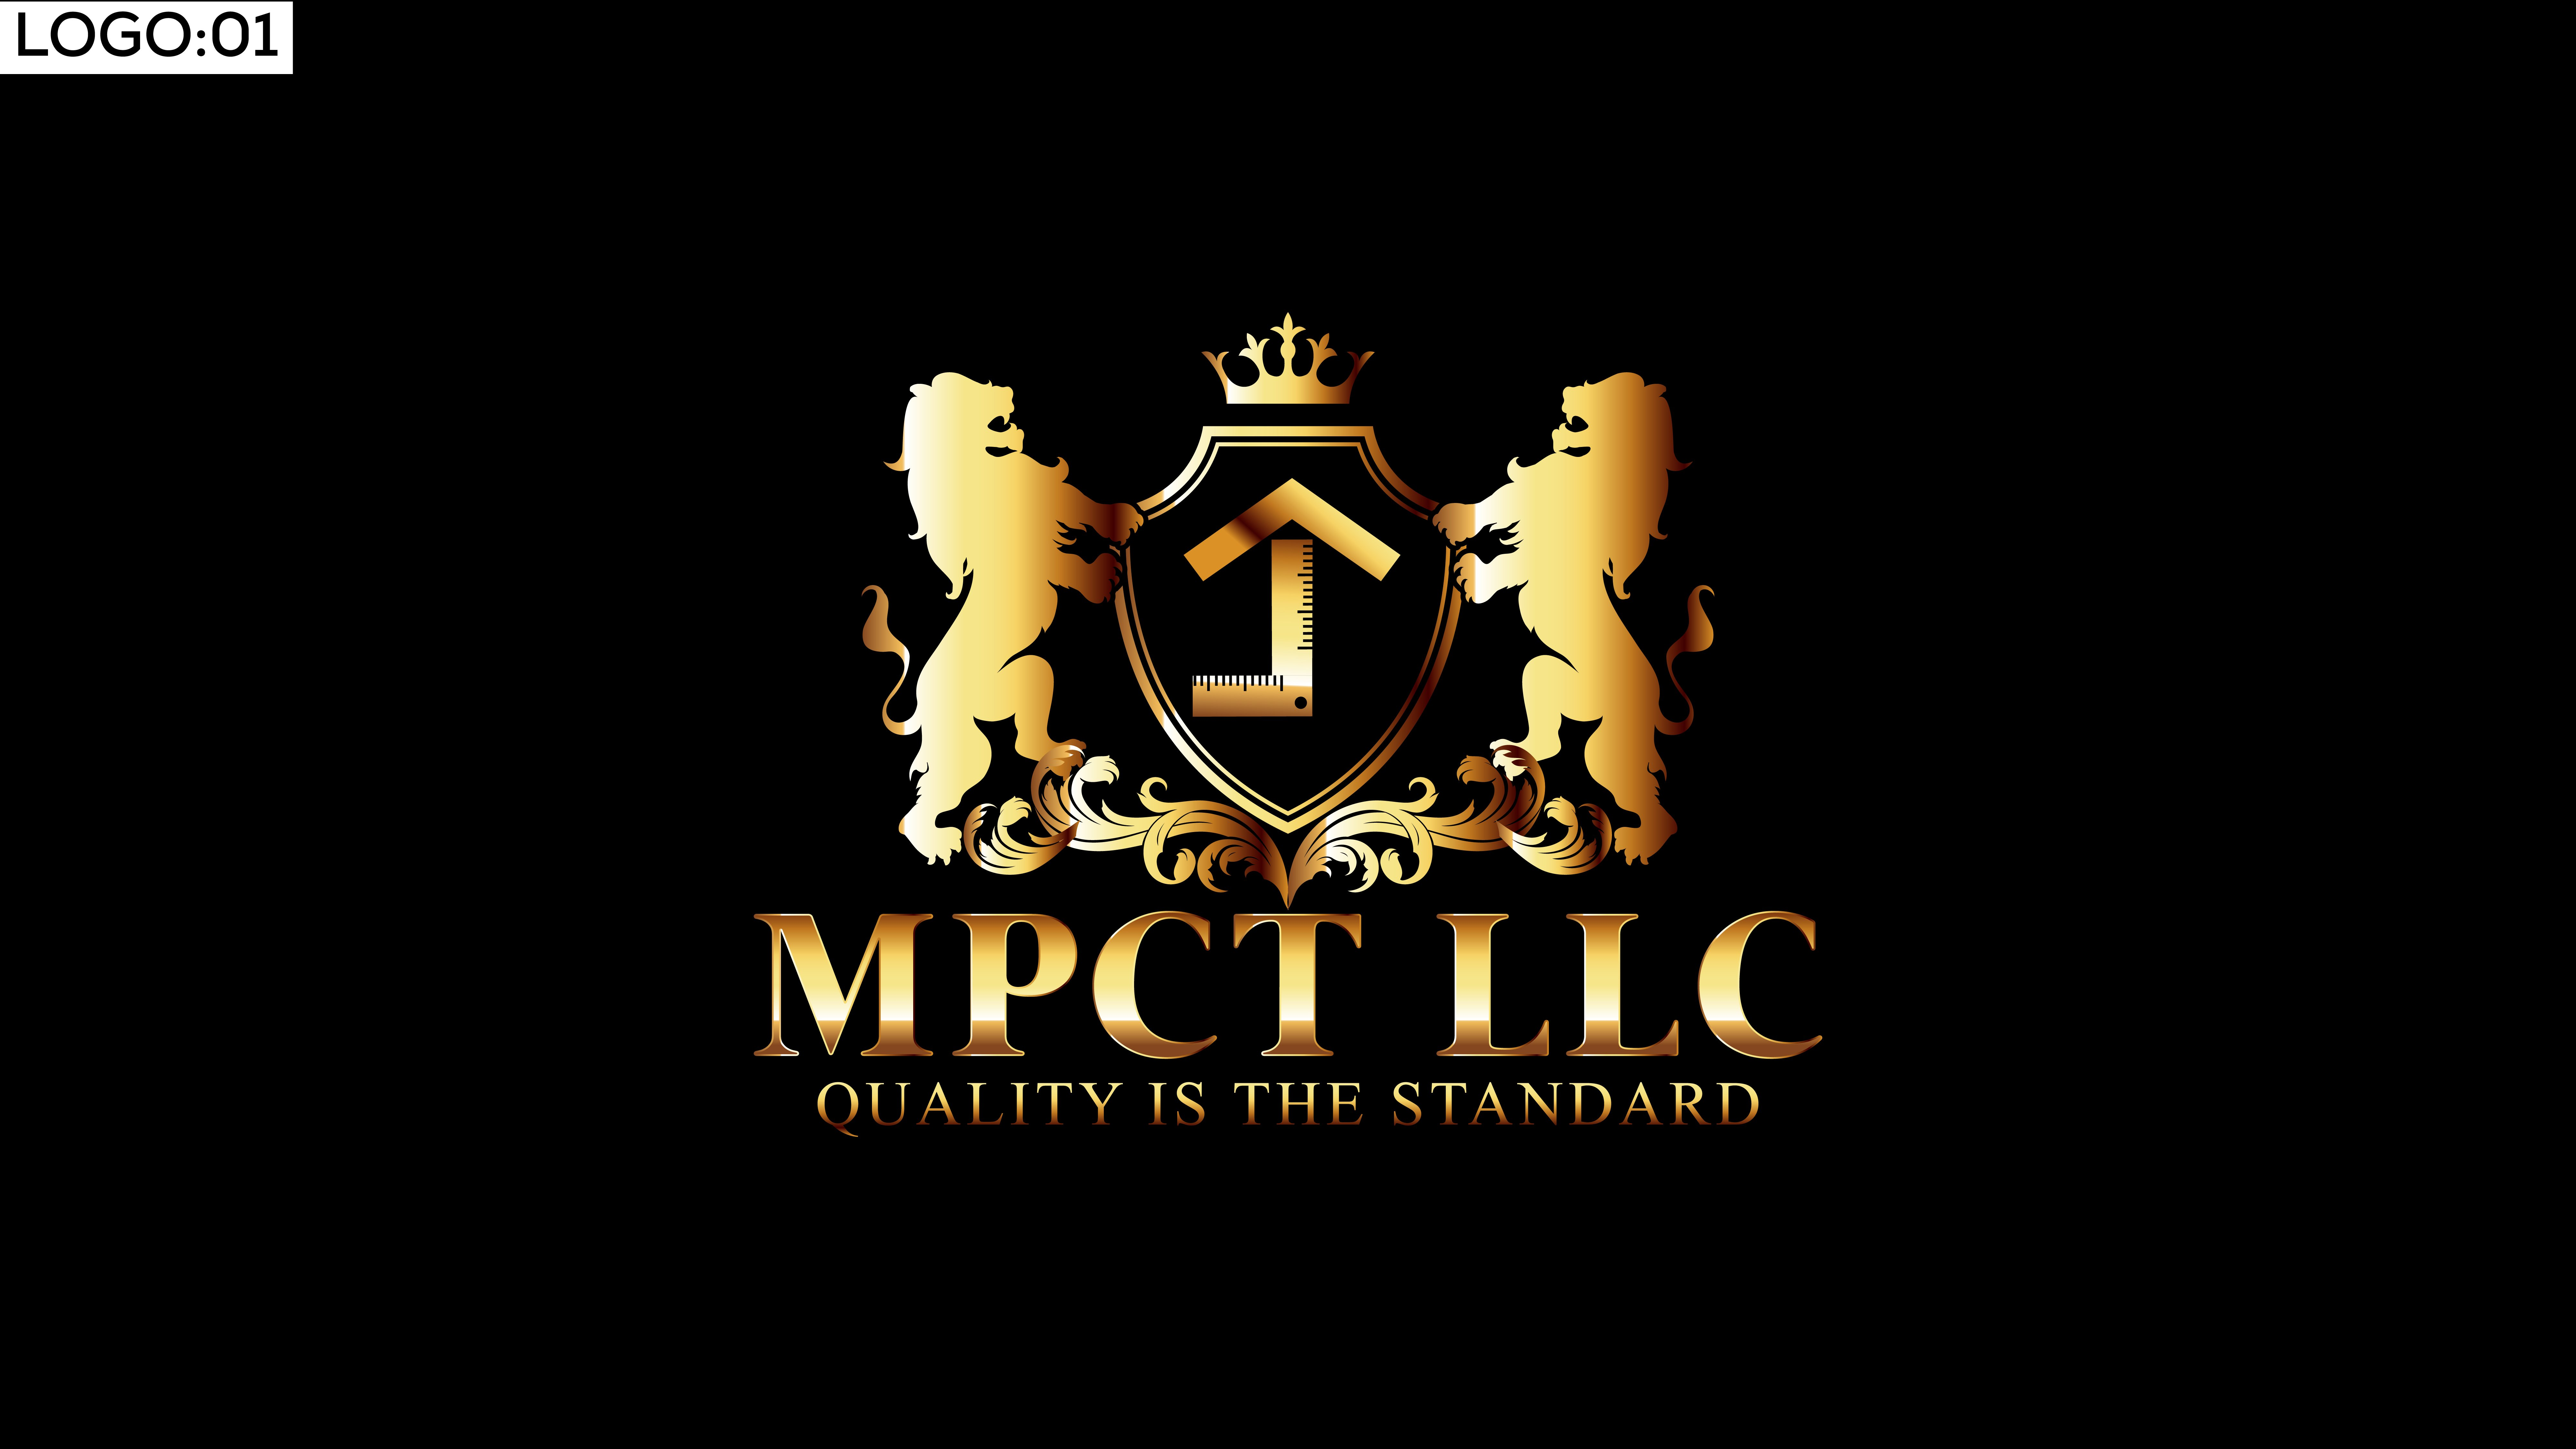  MPCT LLC QUALITY IS THE STANDARD